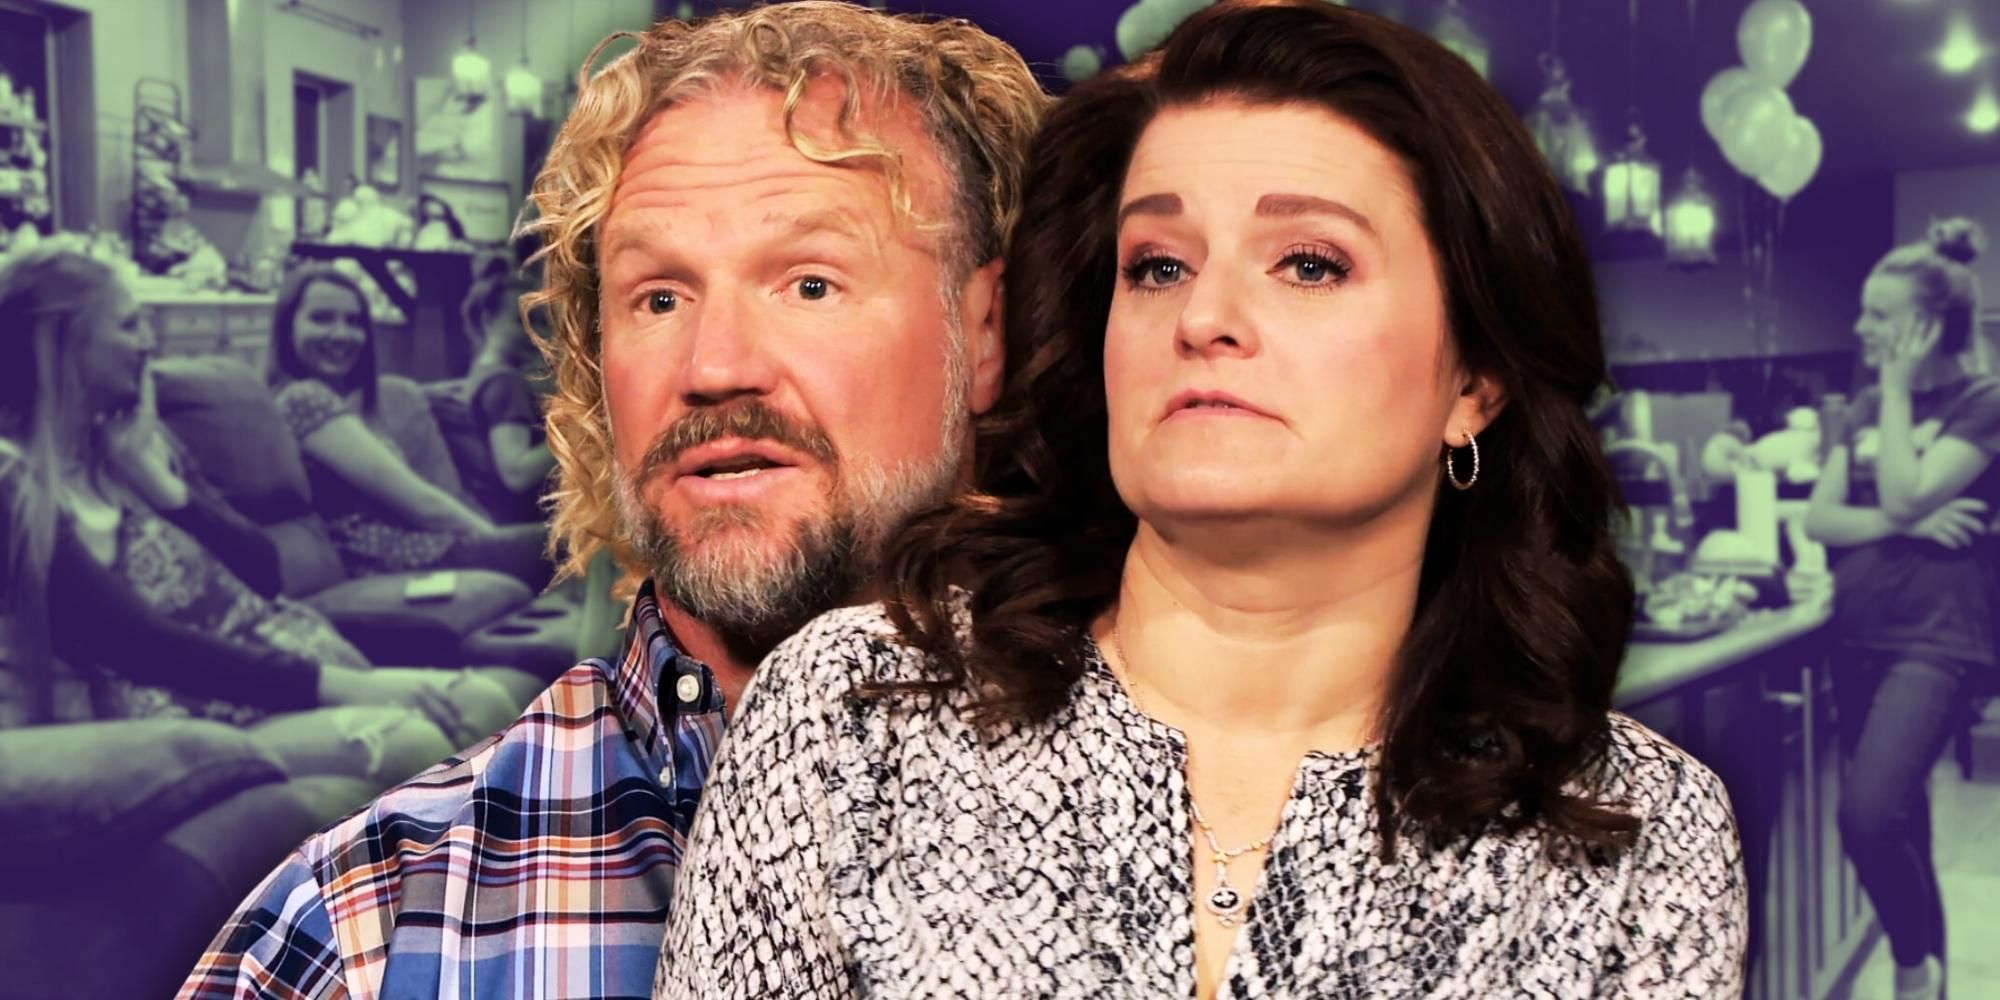 Sister Wives’ Kody & Robyn Brown looking serious